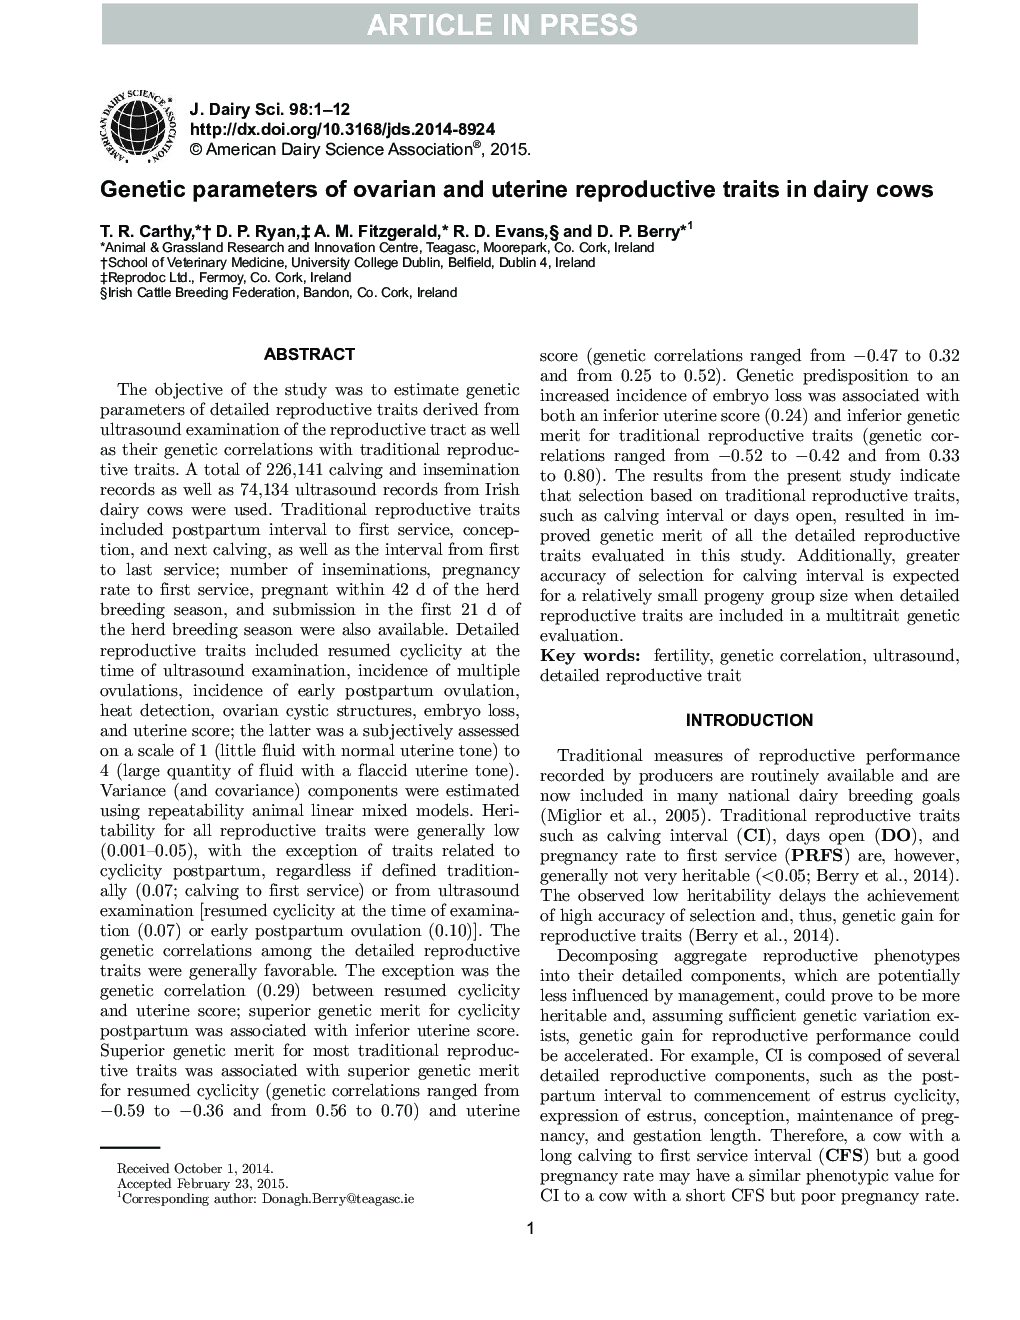 Genetic parameters of ovarian and uterine reproductive traits in dairy cows